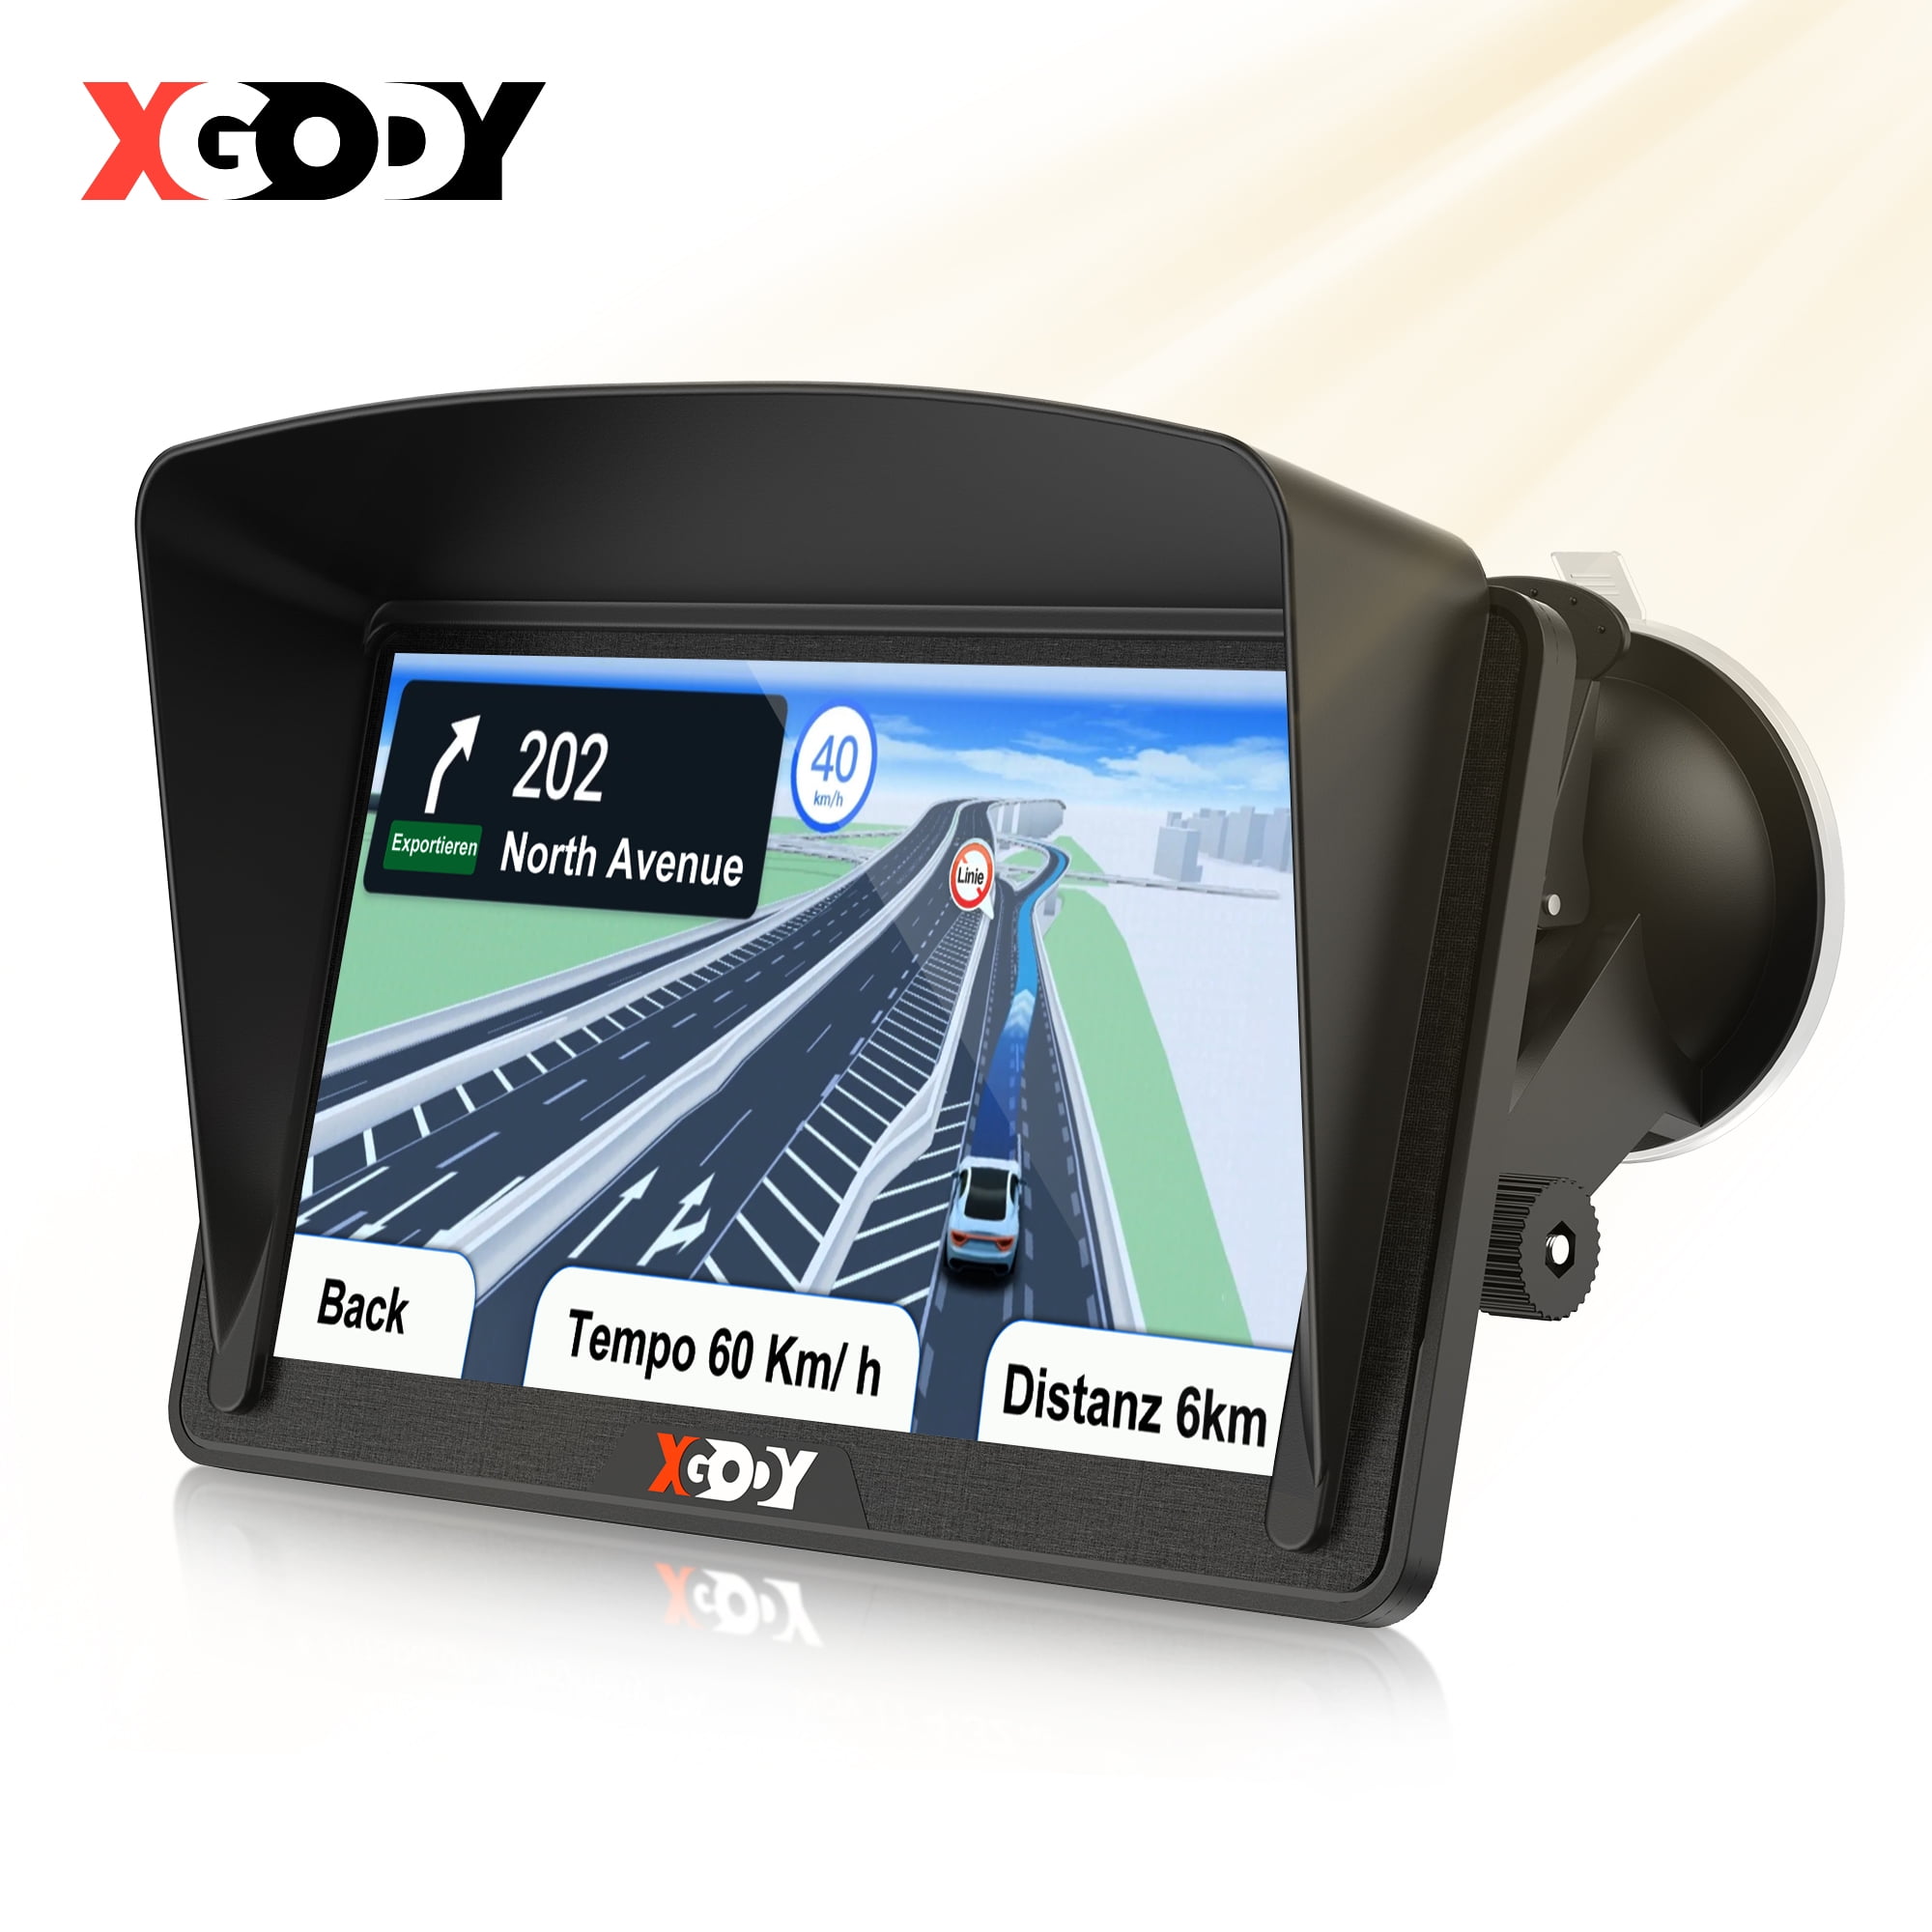 3D Navigation+Music+Video Mingbao 5Inch Car & Truck GPS Navigation Navigator Sat Navi 8GB 128MB Touch Screen+FM The Navigation Voice and Music Will be Directly Sent to The car Speaker 